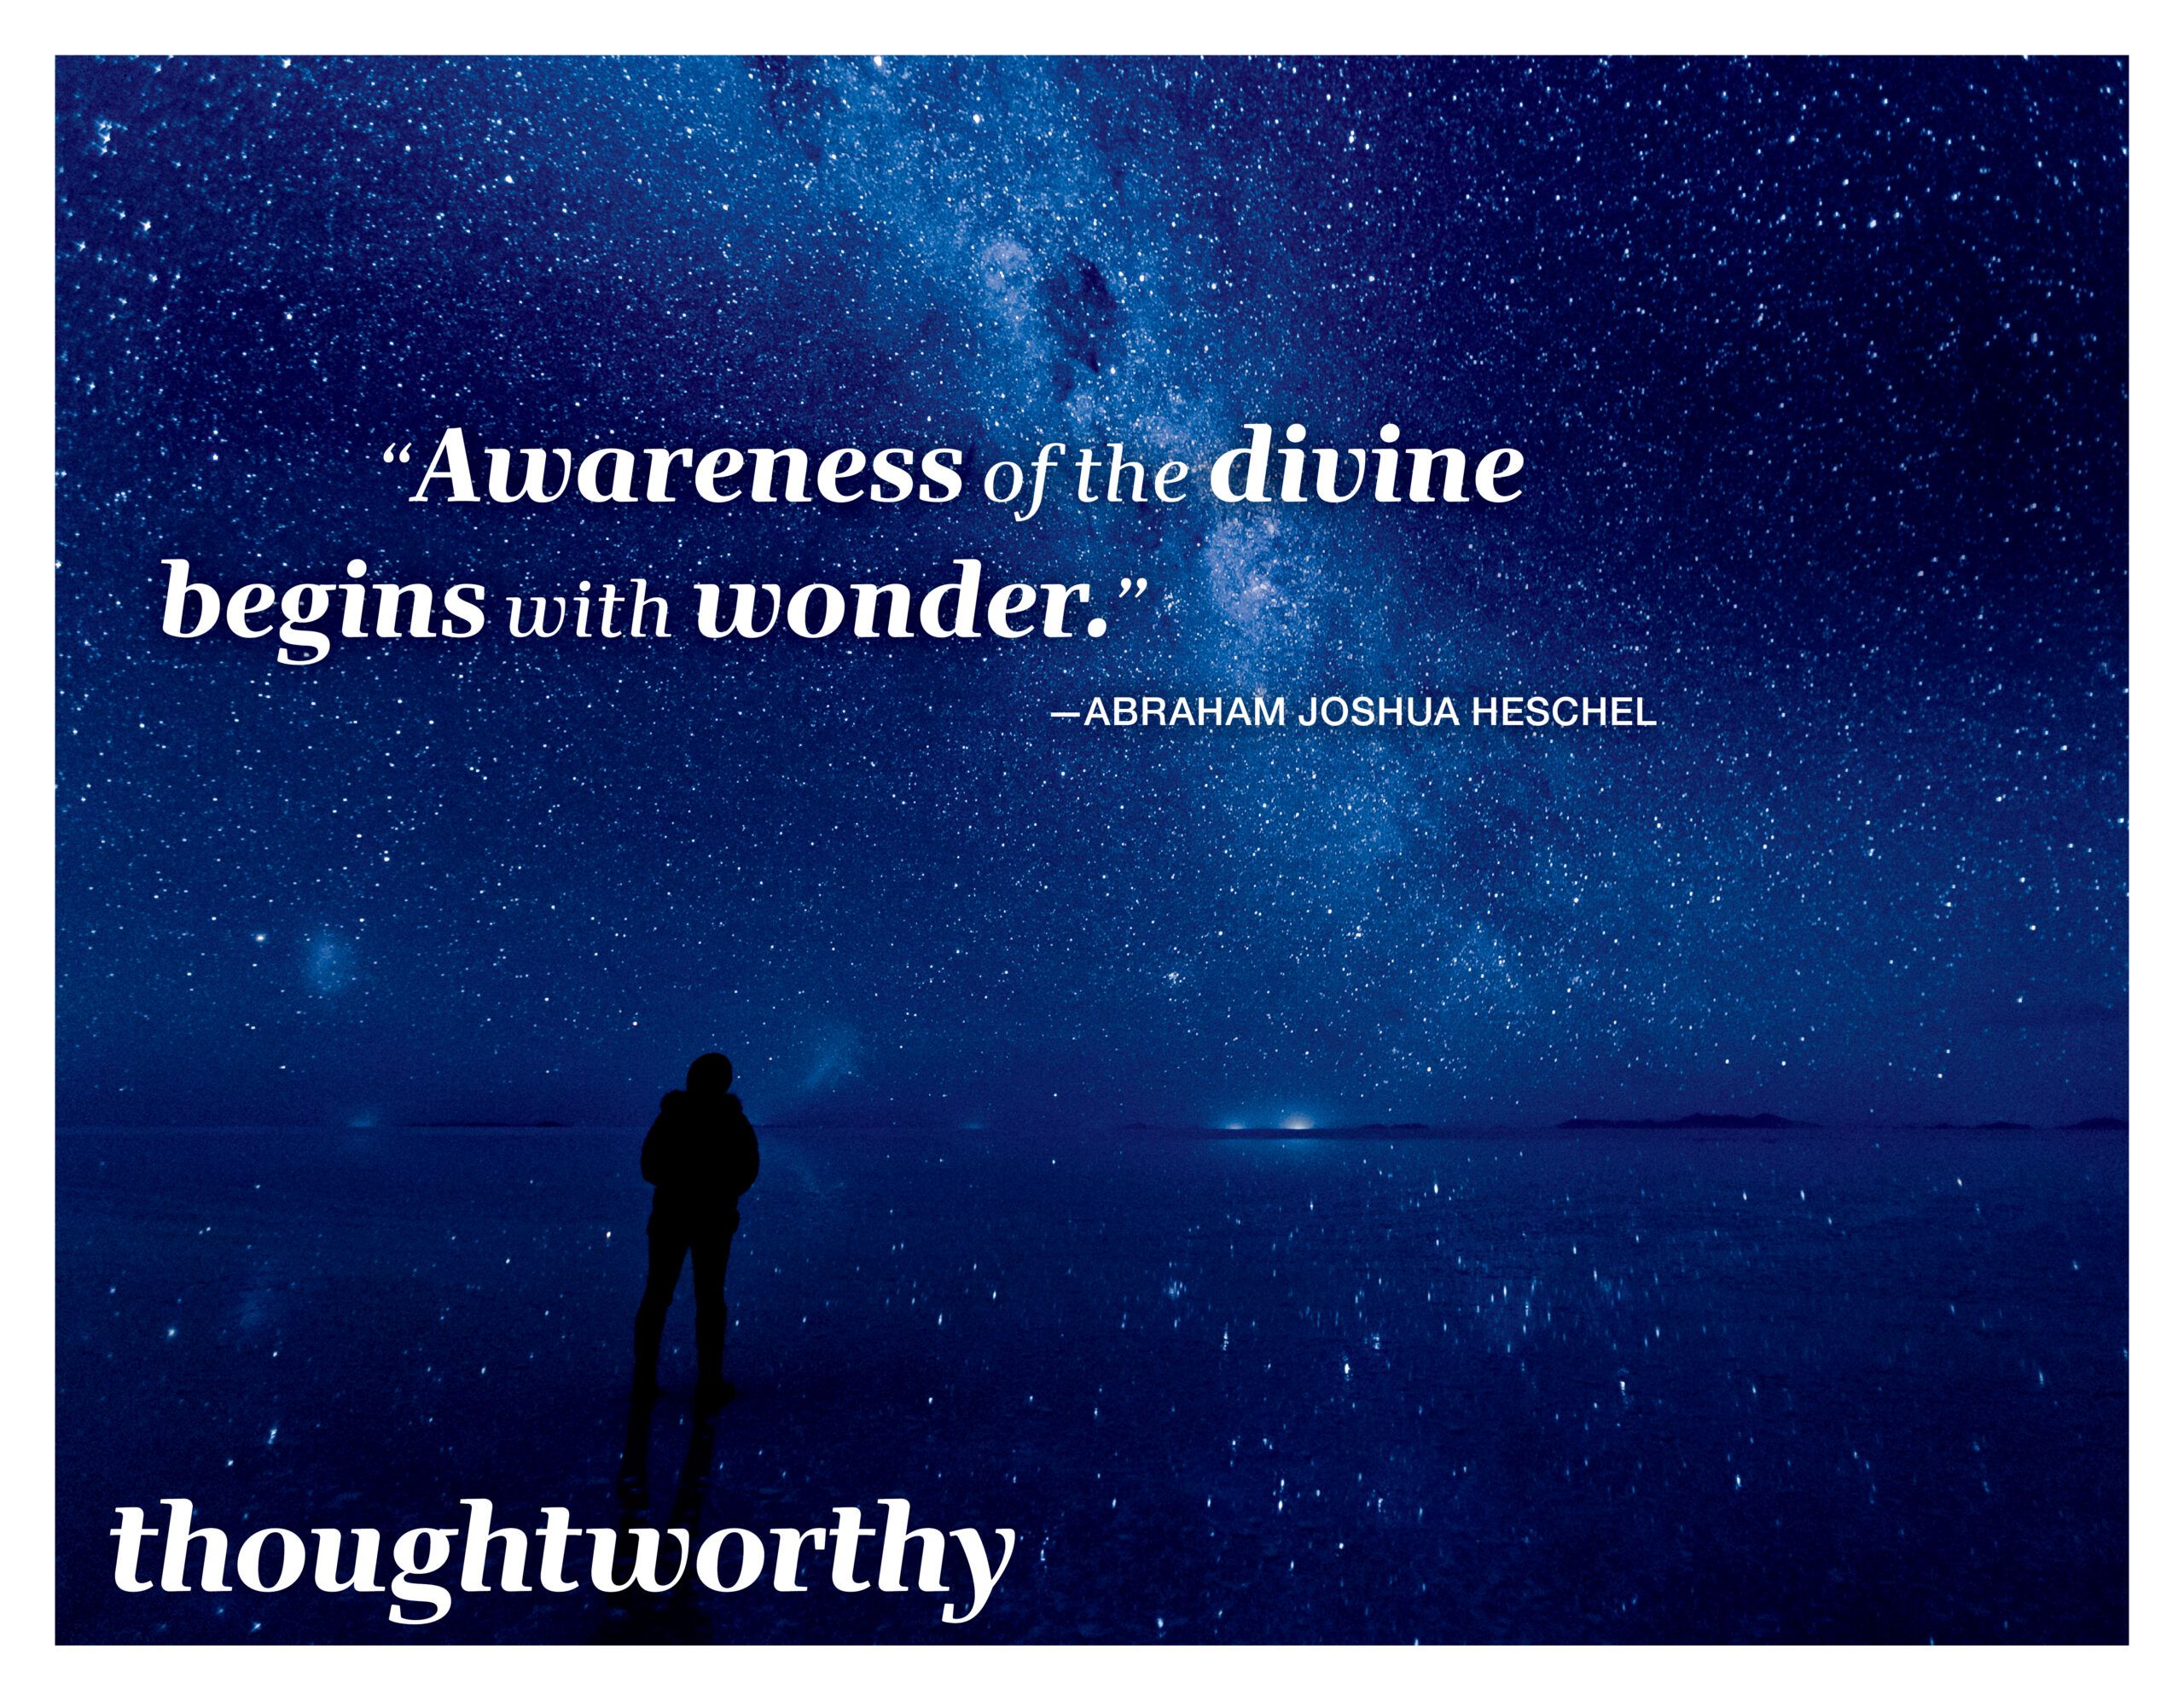 Awareness of the divine begins with wonder.